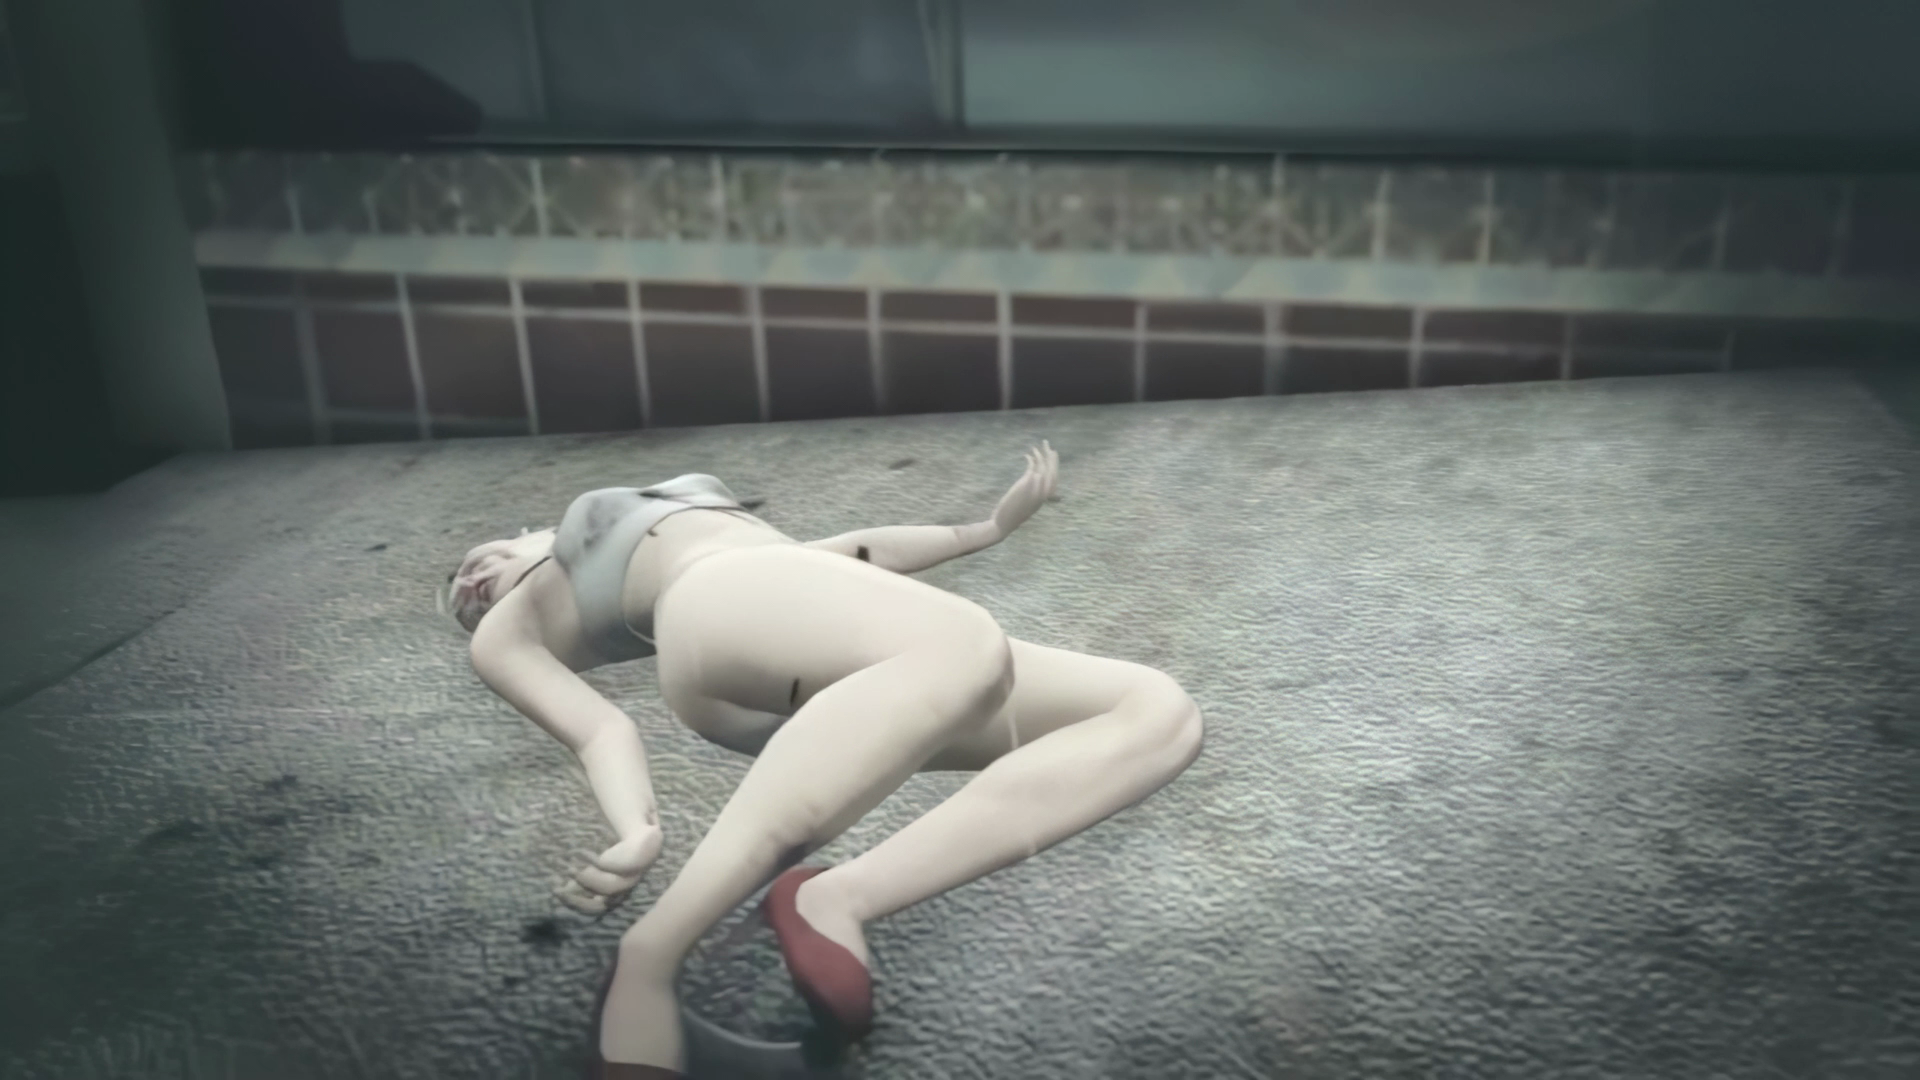  George Roxby Smith,  99 Problems [WASTED] , in-game performance, machinima (color, sound, 4' 45"), 2014 